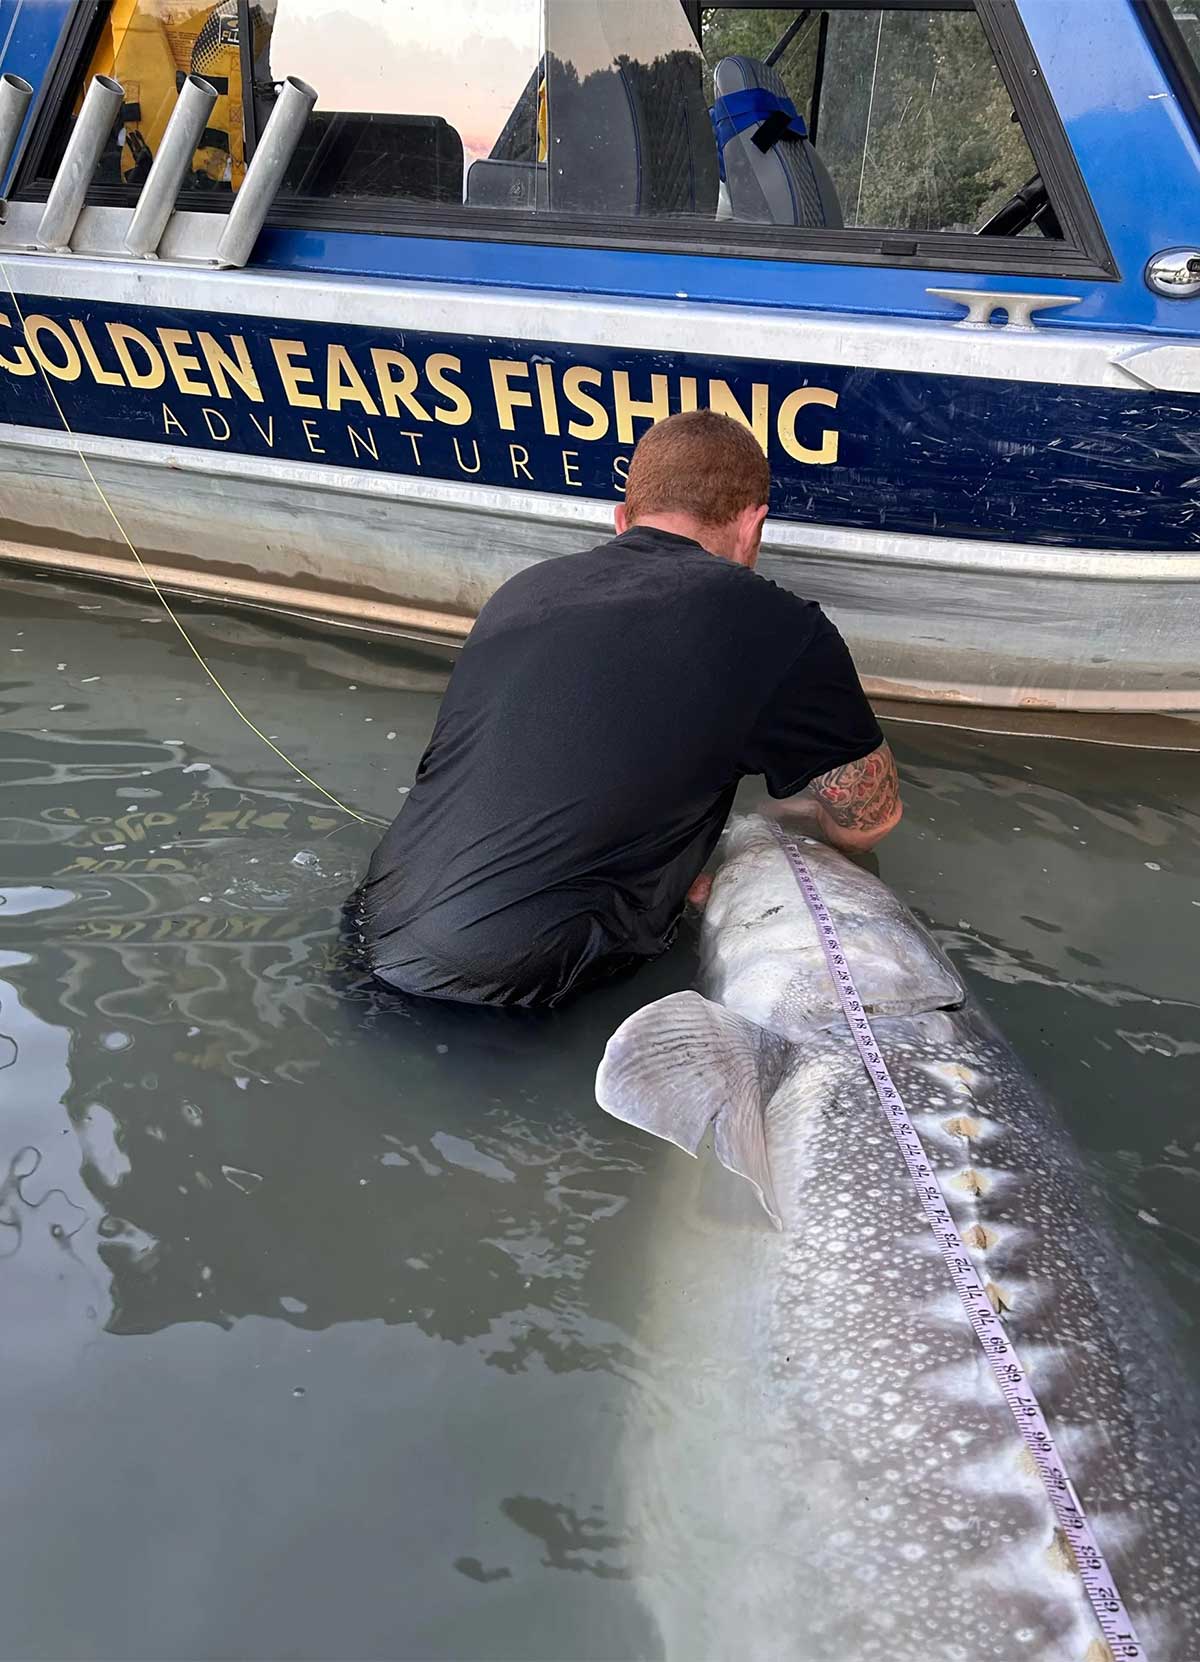 Man catching large sturgeon fish with Golden Ears Fishing Adventures - Our Story